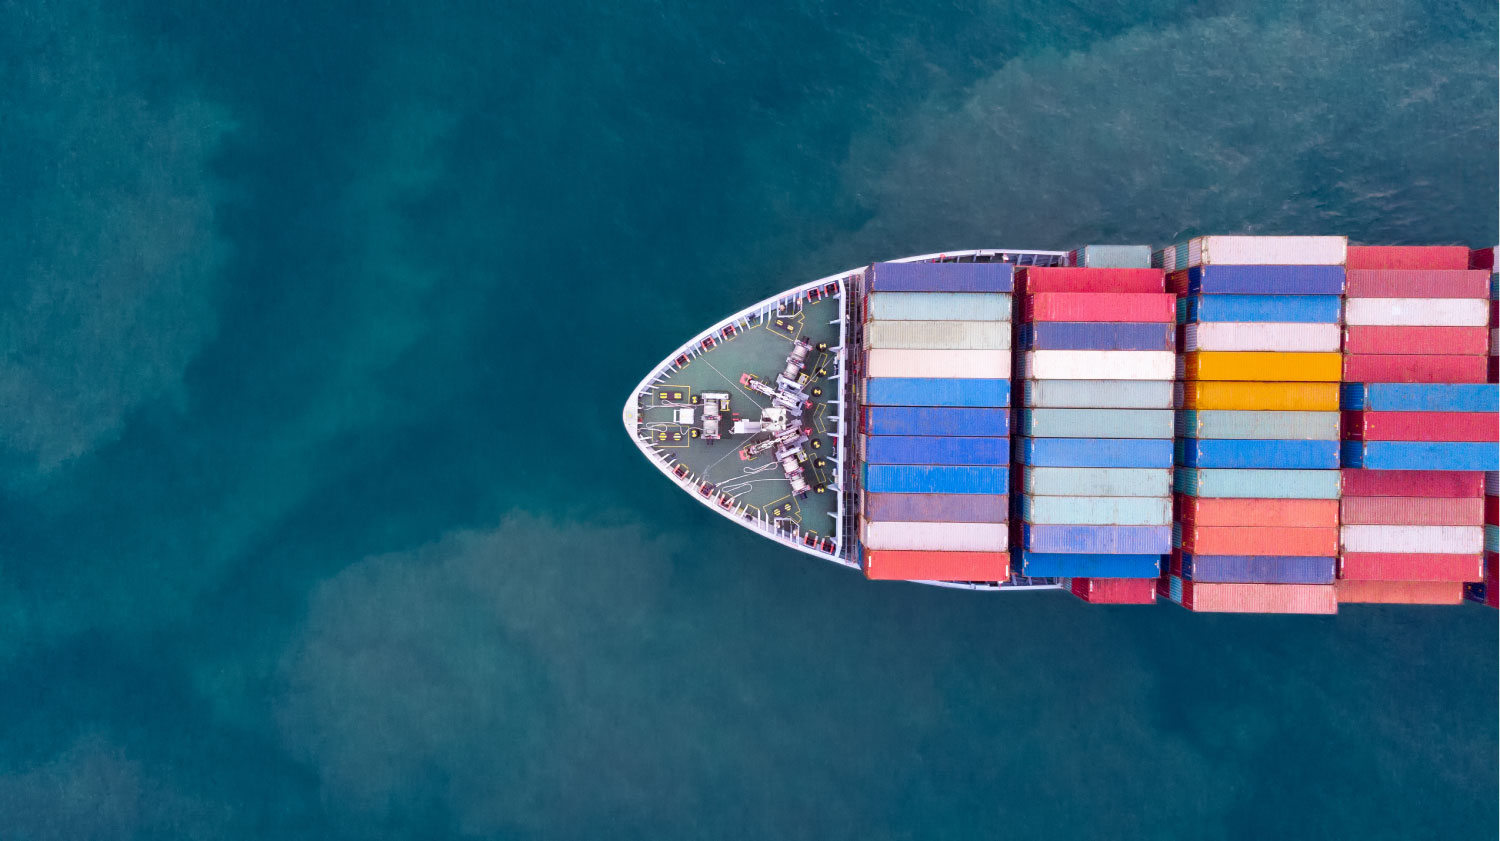 an aerial view of a laden container ship